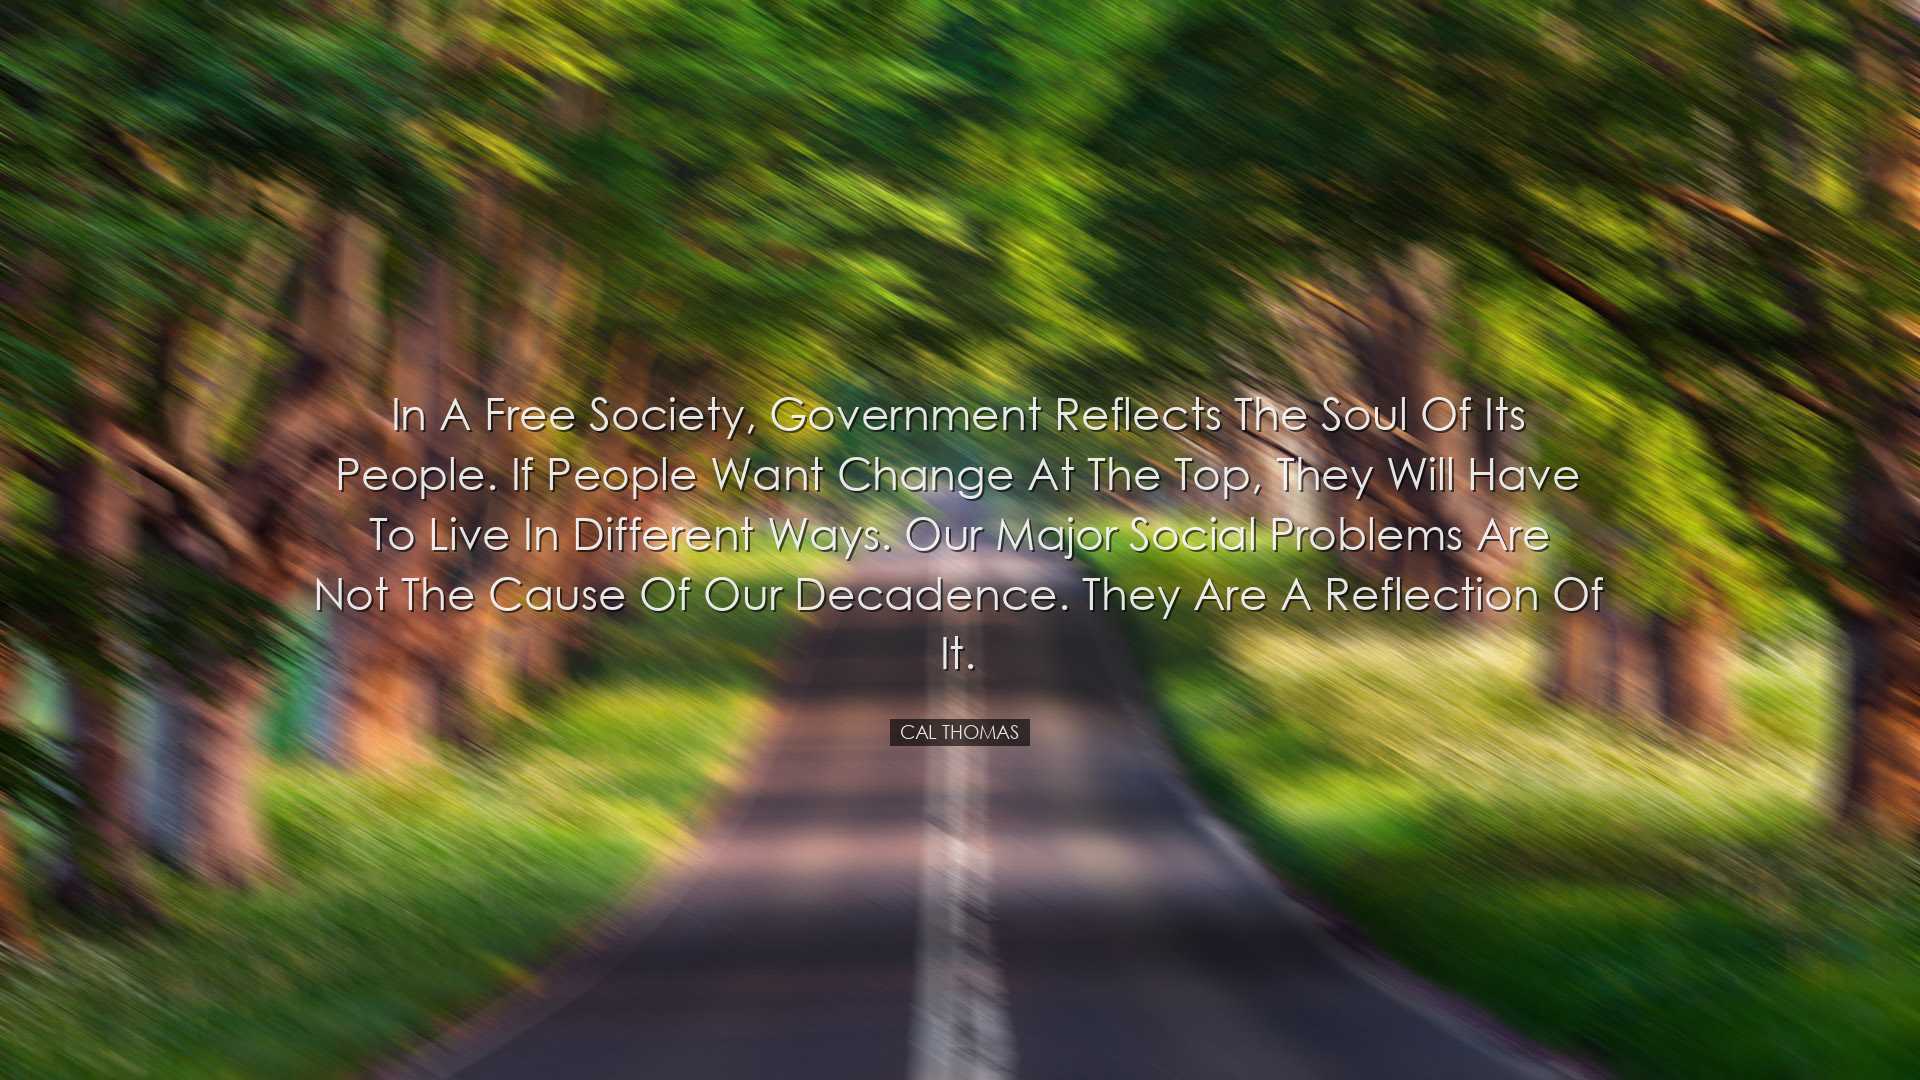 In a free society, government reflects the soul of its people. If